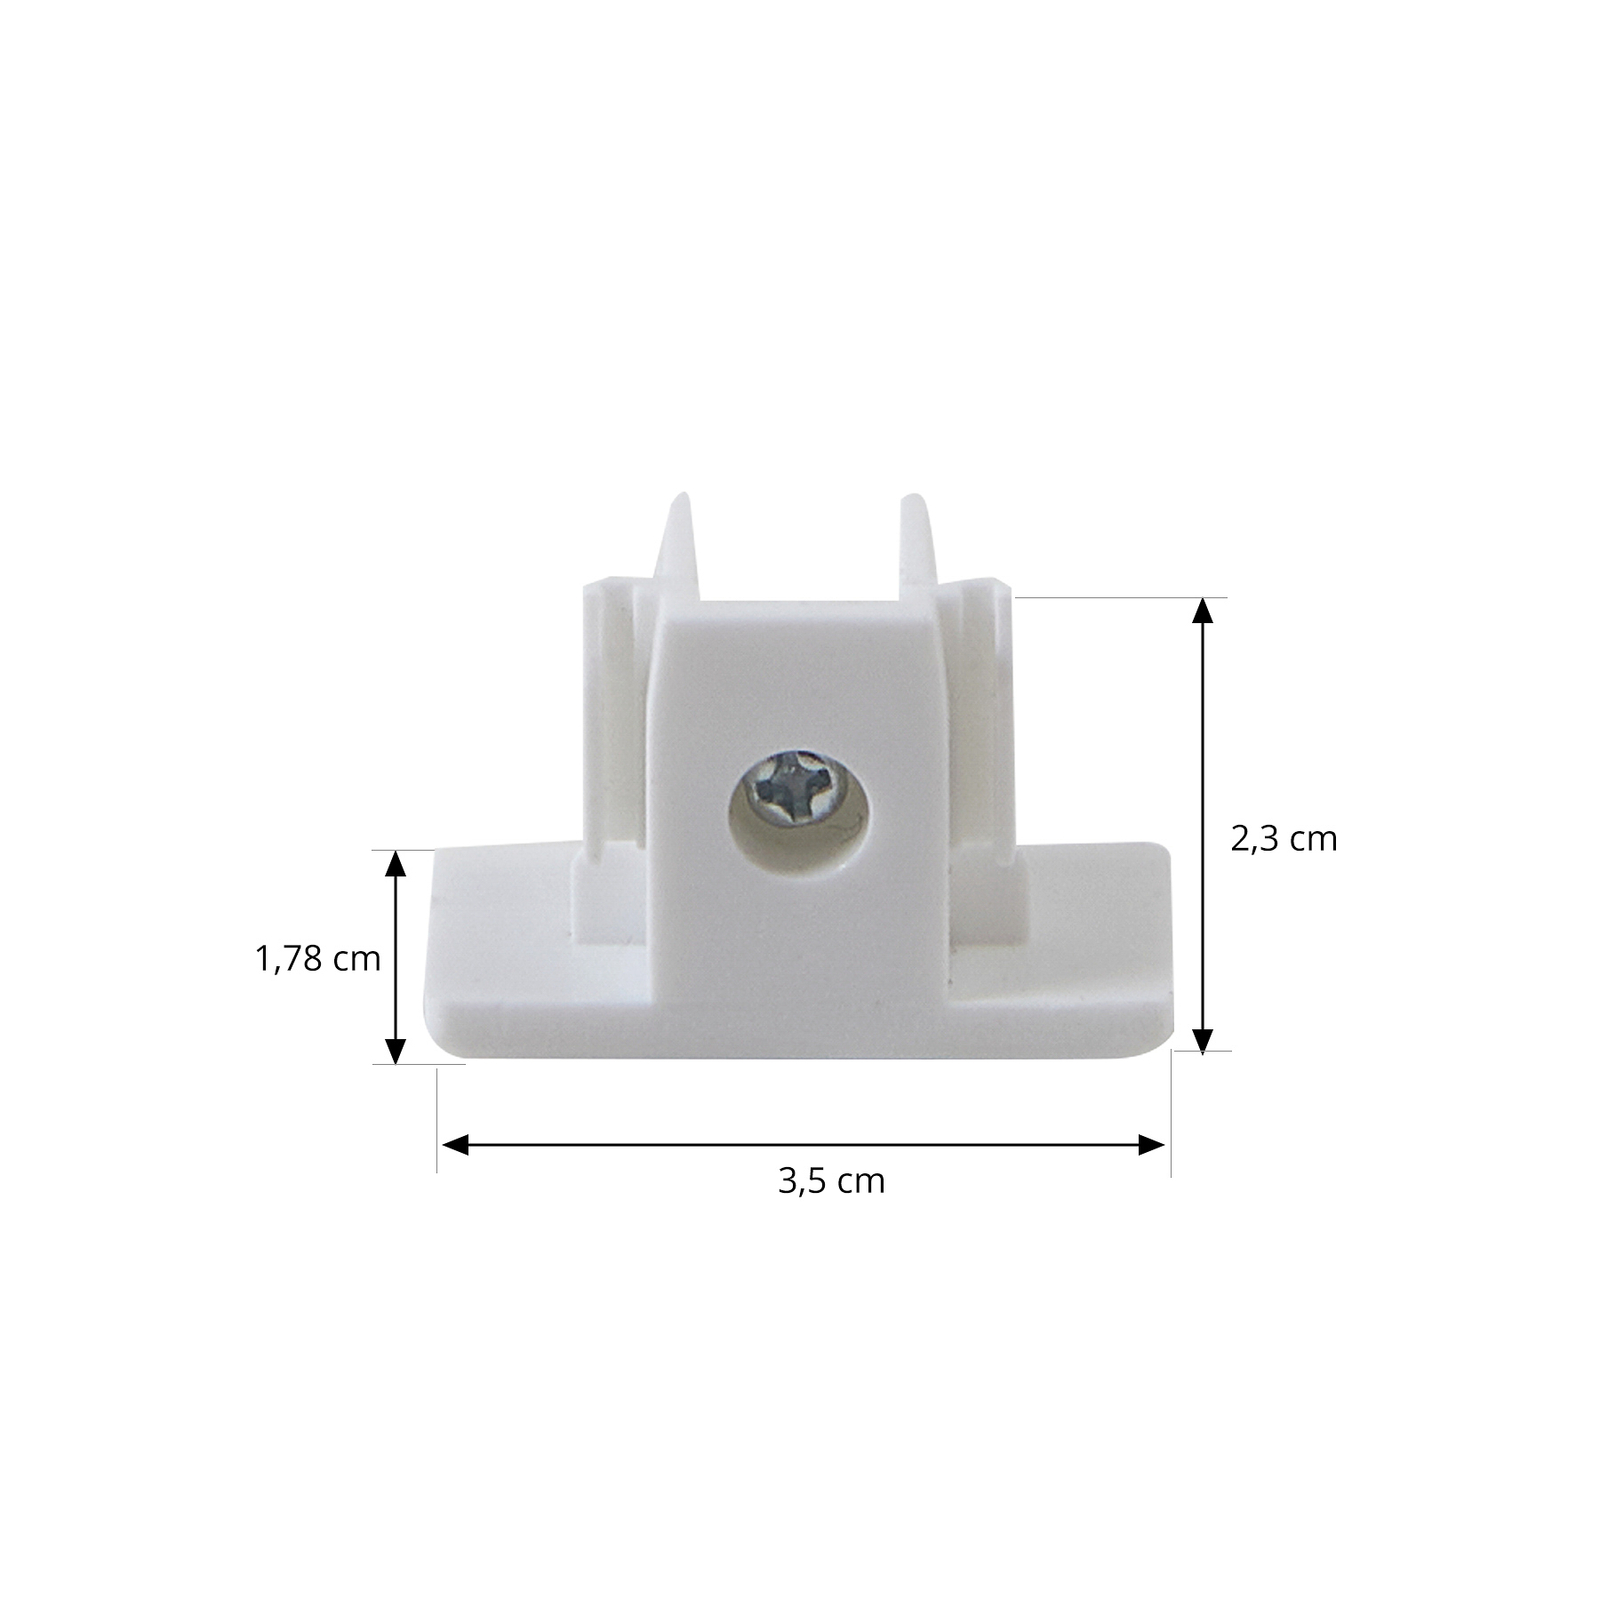 Lindby end cap Linaro, white, screw, single-circuit track lighting system